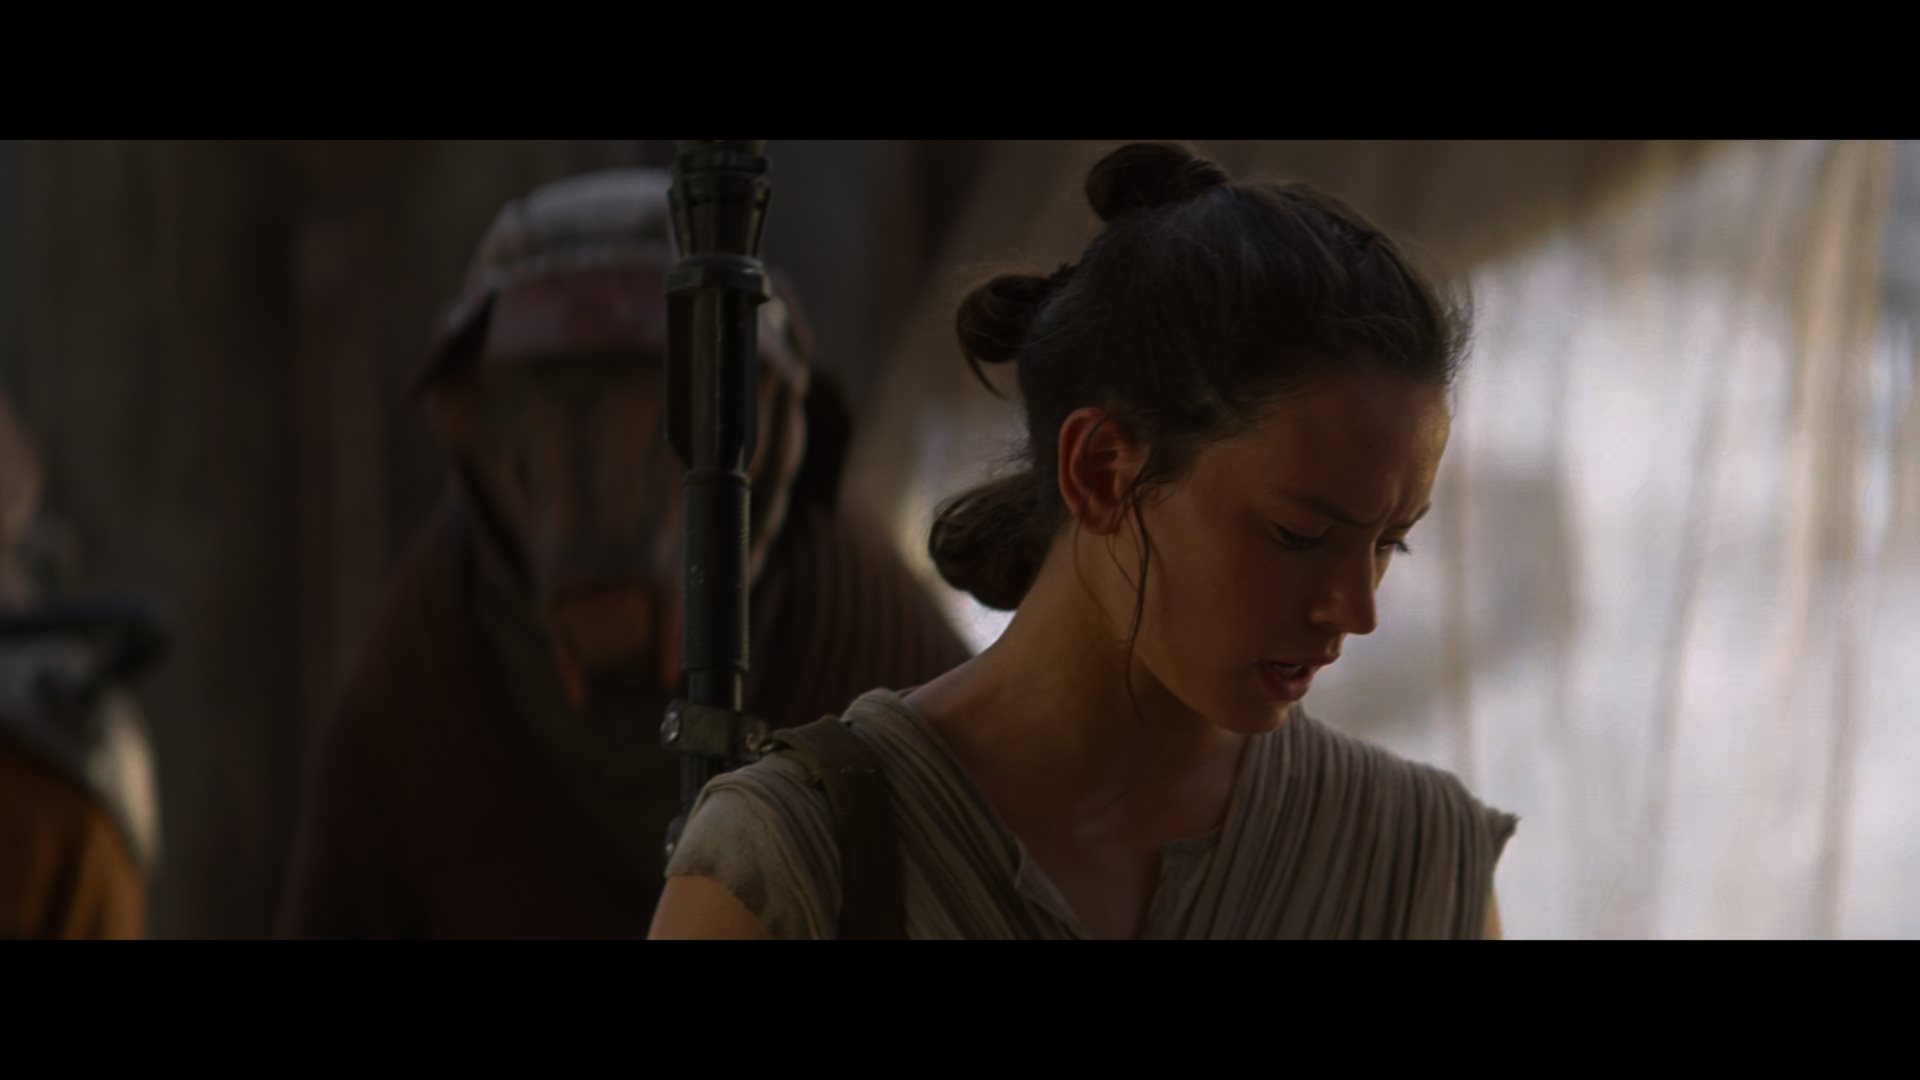 Star Wars Ep. VII: The Force Awakens instal